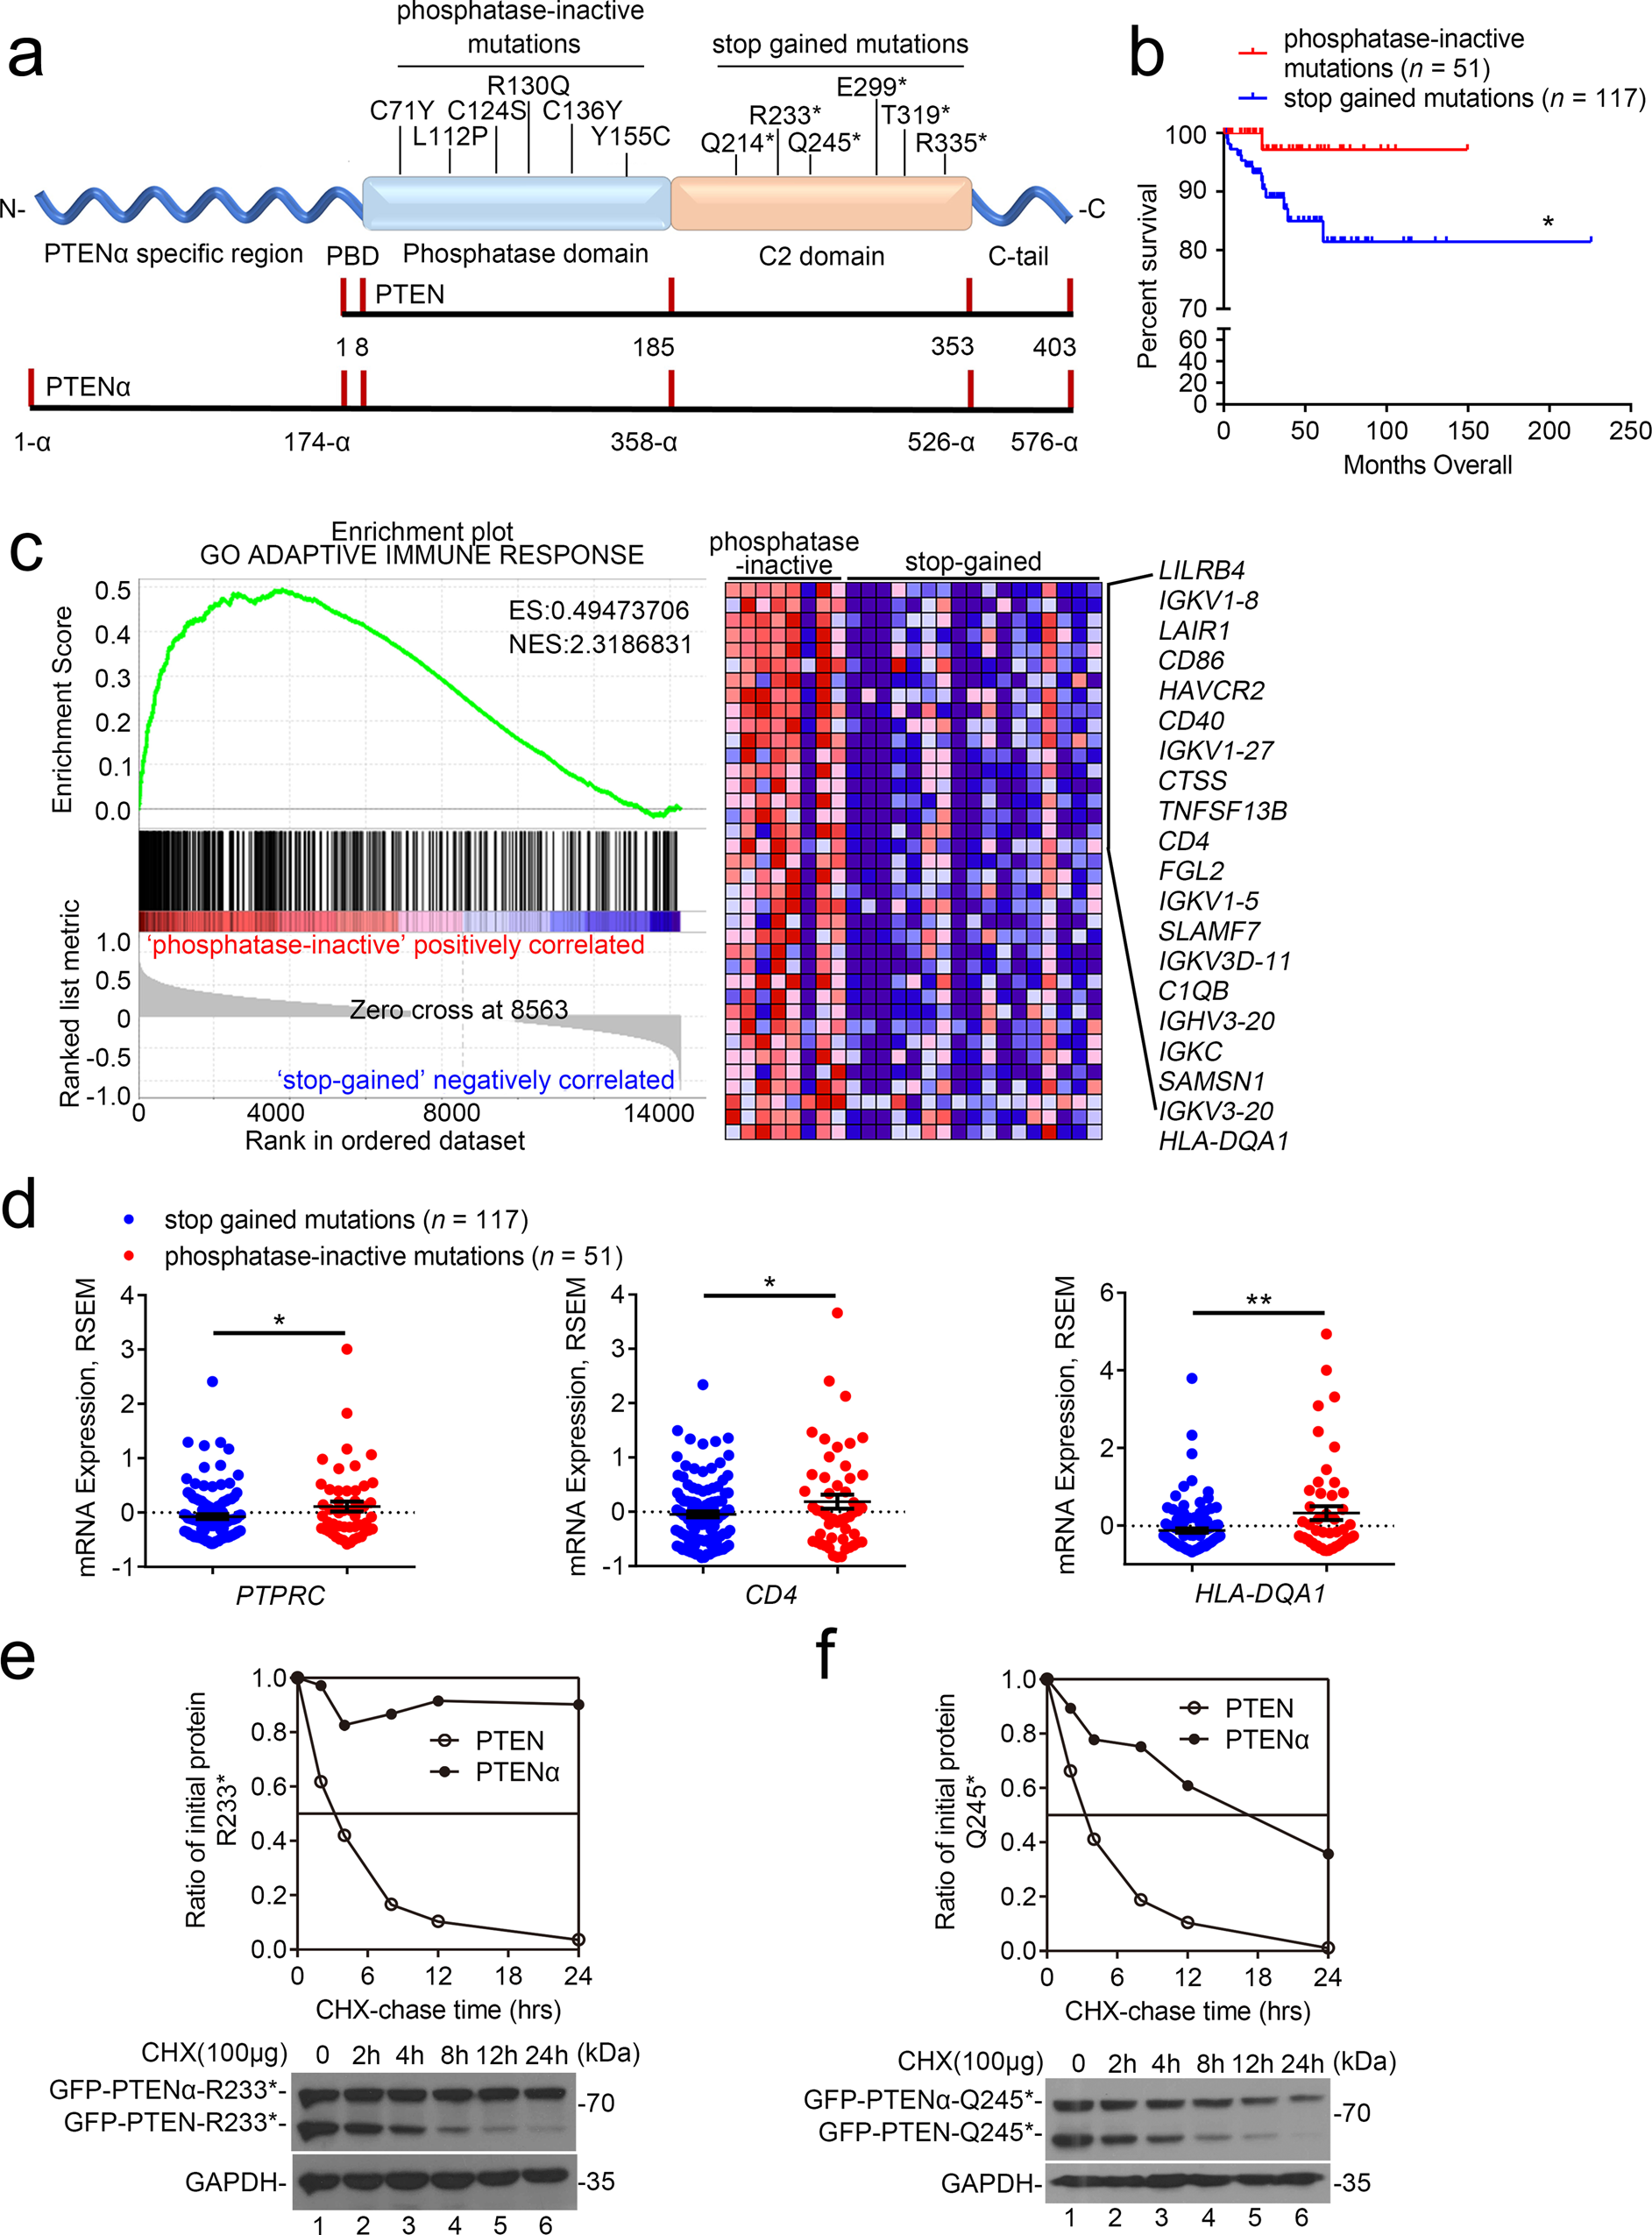 PTENα functions as an immune suppressor and promotes immune resistance in  PTEN-mutant cancer | Nature Communications